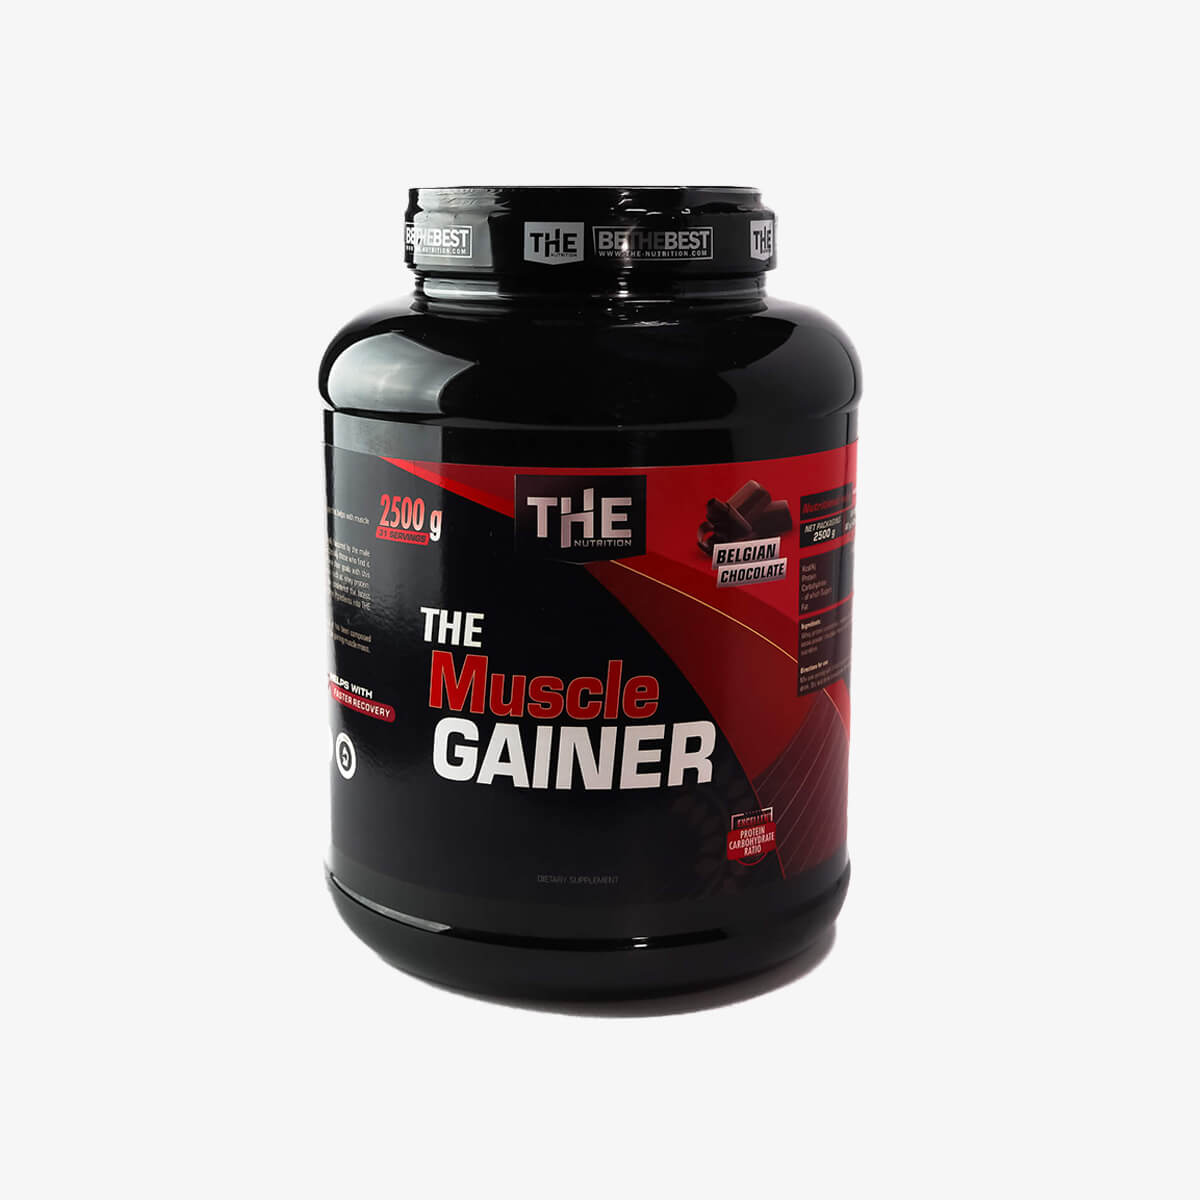 THE Muscle Gainer (2.5kg)